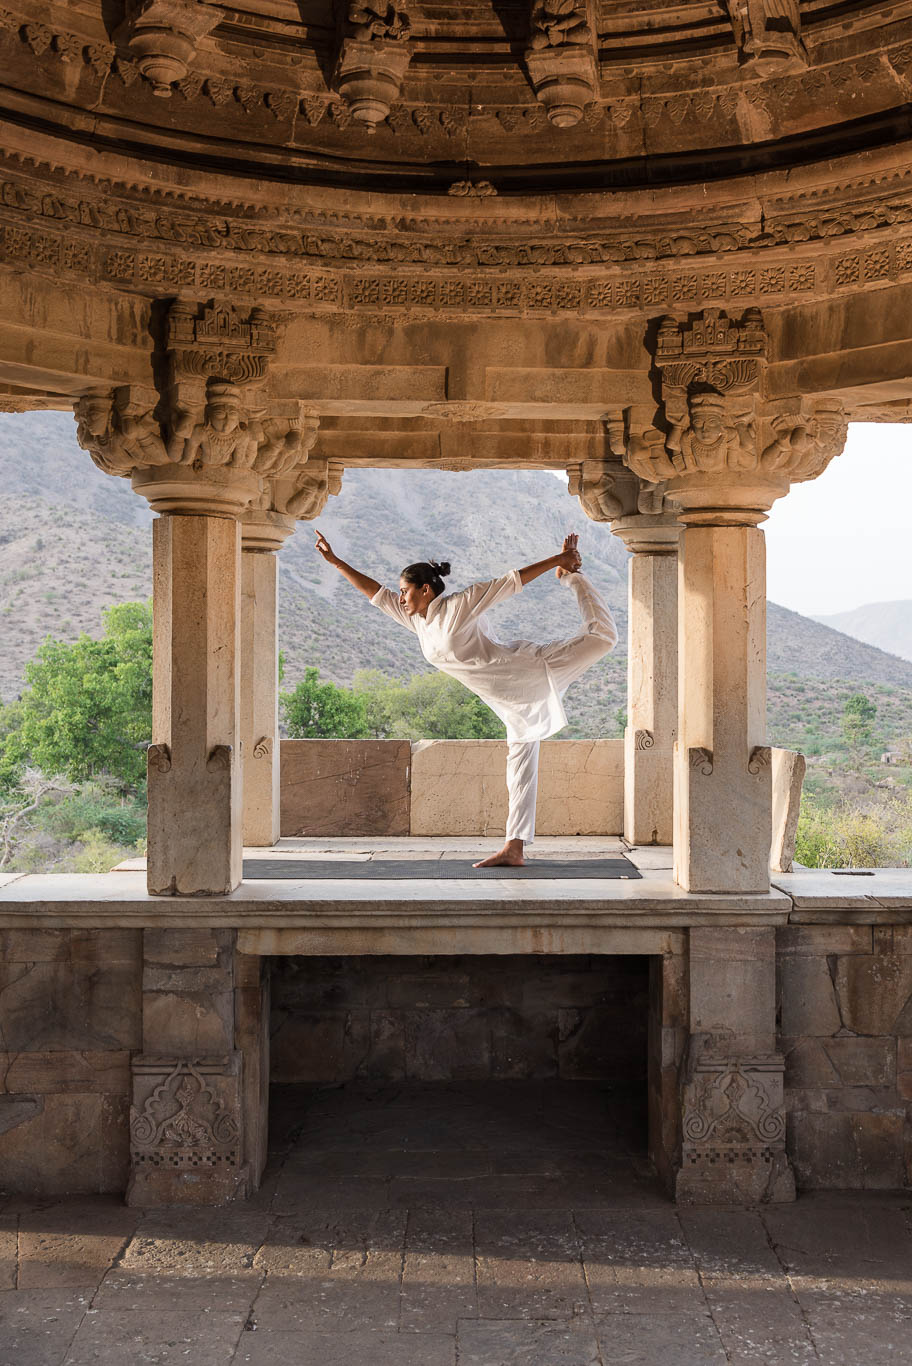 Yoga session at a temple in the abandoned city of Bhanghar